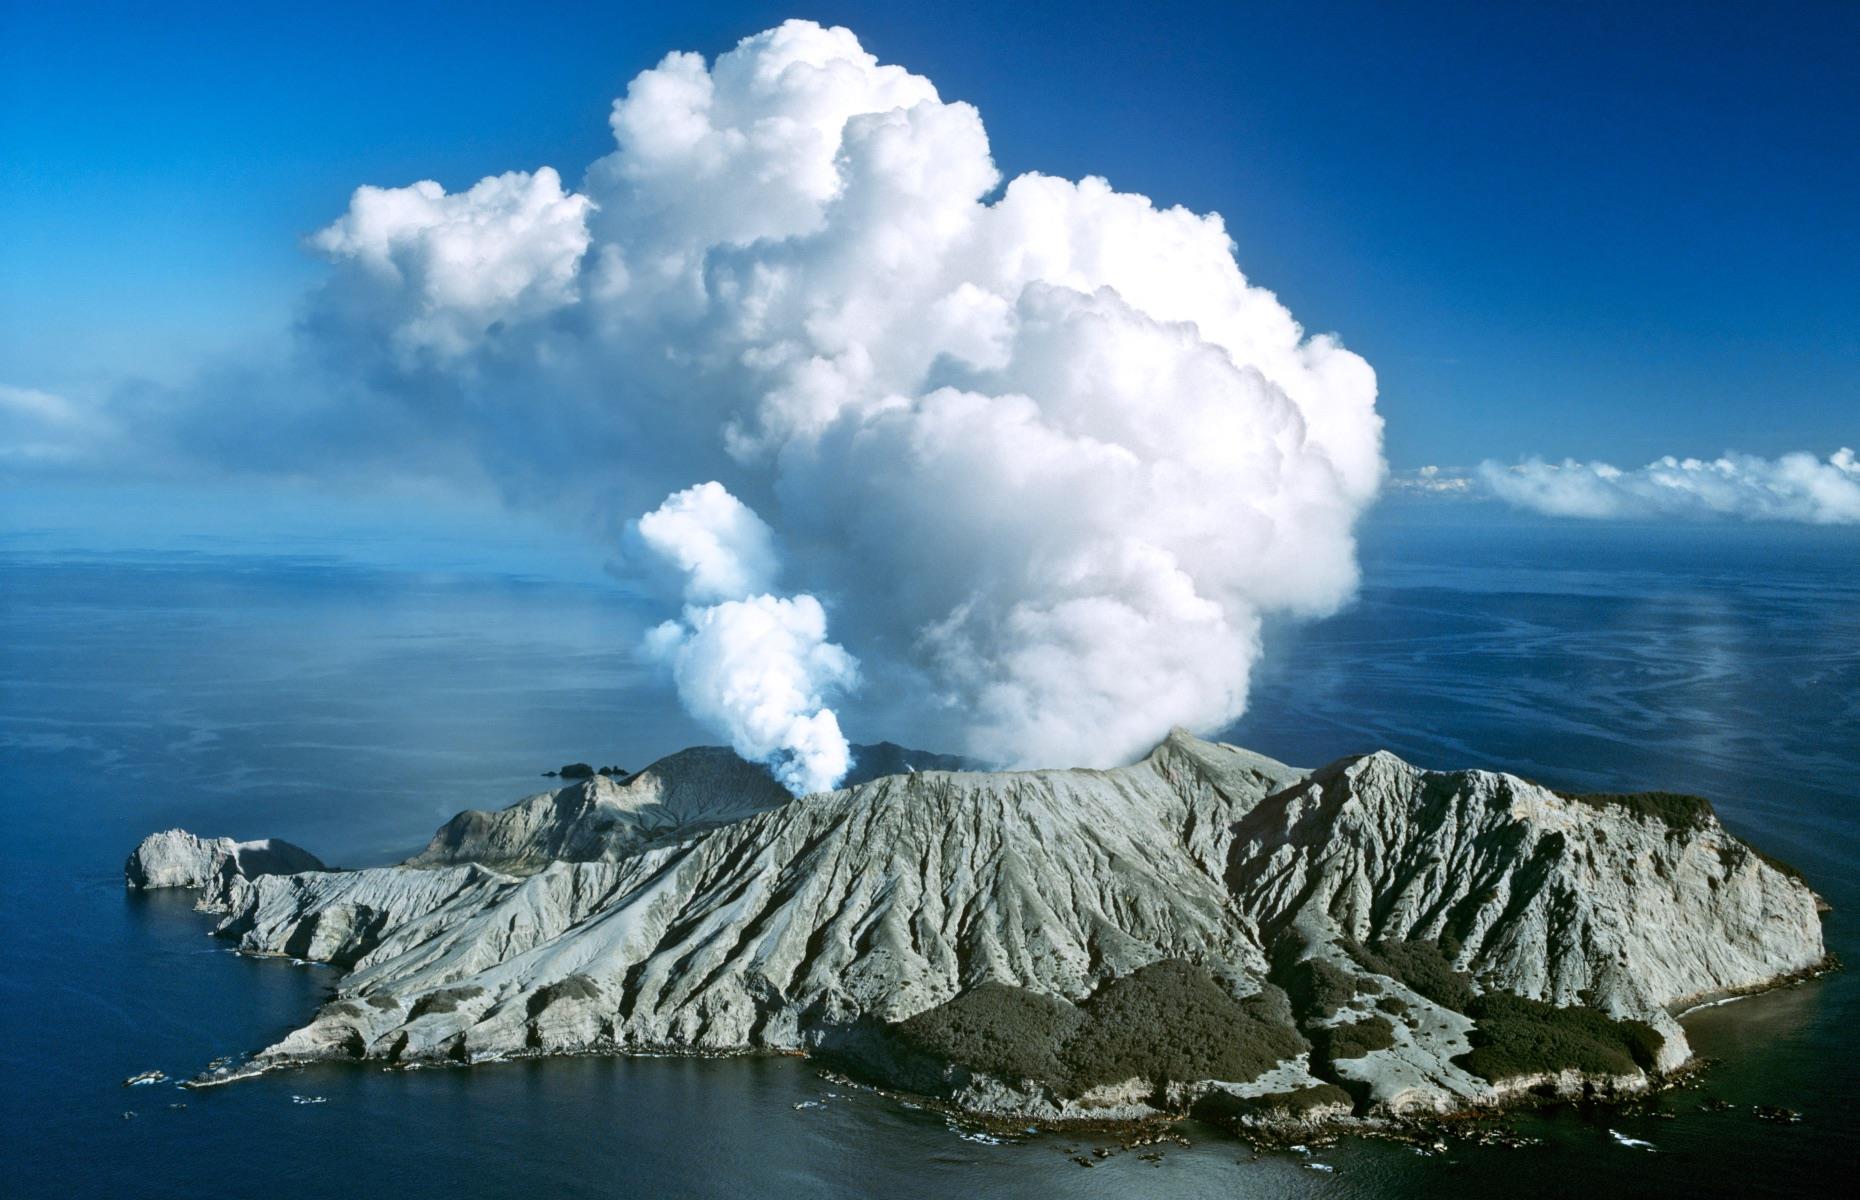 New Zealand’s most active cone volcano, the imposing White Island (also known as Whakaari) forms part of the Pacific Ring of Fire and sits 30 miles (48km) offshore from North Island’s east coast. A sudden, explosive eruption in 2019 effectively ended guided tours to the island, but scenic flights over its steaming crater, sulphurous vents and acid lakes are still available, taking off from nearby Whakatane, Rotorua or Tauranga.